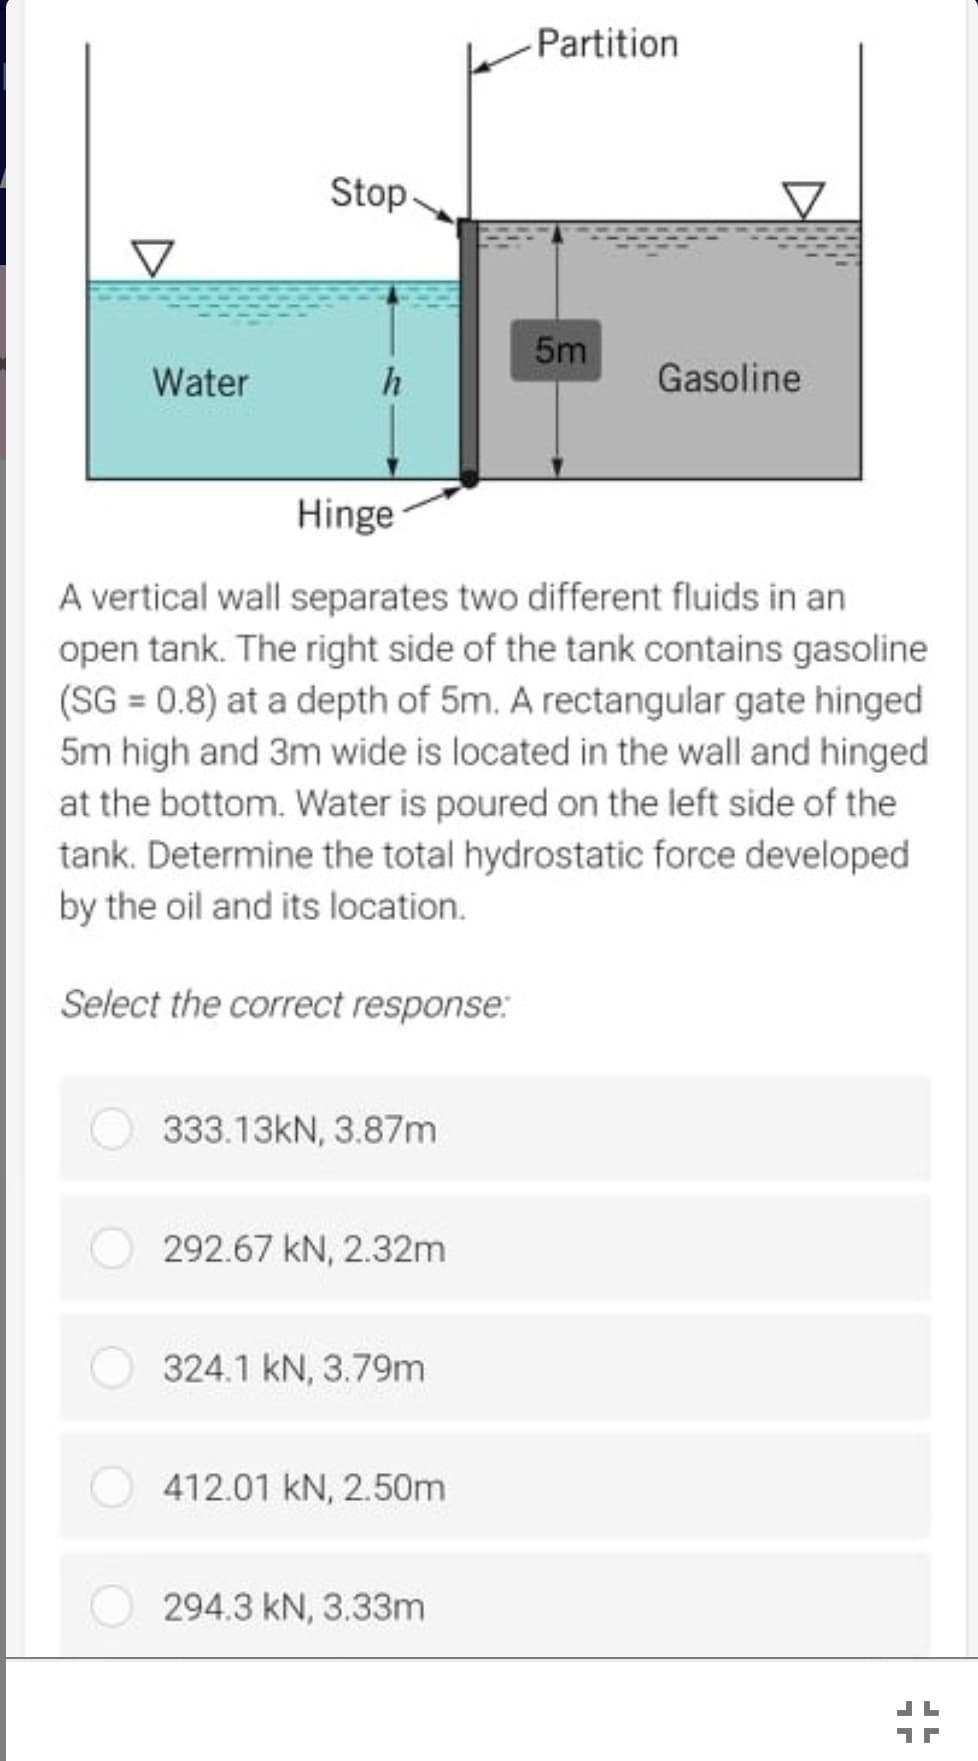 Partition
Stop
5m
Water
Gasoline
Hinge
A vertical wall separates two different fluids in an
open tank. The right side of the tank contains gasoline
(SG = 0.8) at a depth of 5m. A rectangular gate hinged
5m high and 3m wide is located in the wall and hinged
at the bottom. Water is poured on the left side of the
tank. Determine the total hydrostatic force developed
by the oil and its location.
Select the correct response:
333.13KN, 3.87m
292.67 kN, 2.32m
324.1 kN, 3.79m
412.01 kN, 2.50m
294.3 kN, 3.33m
